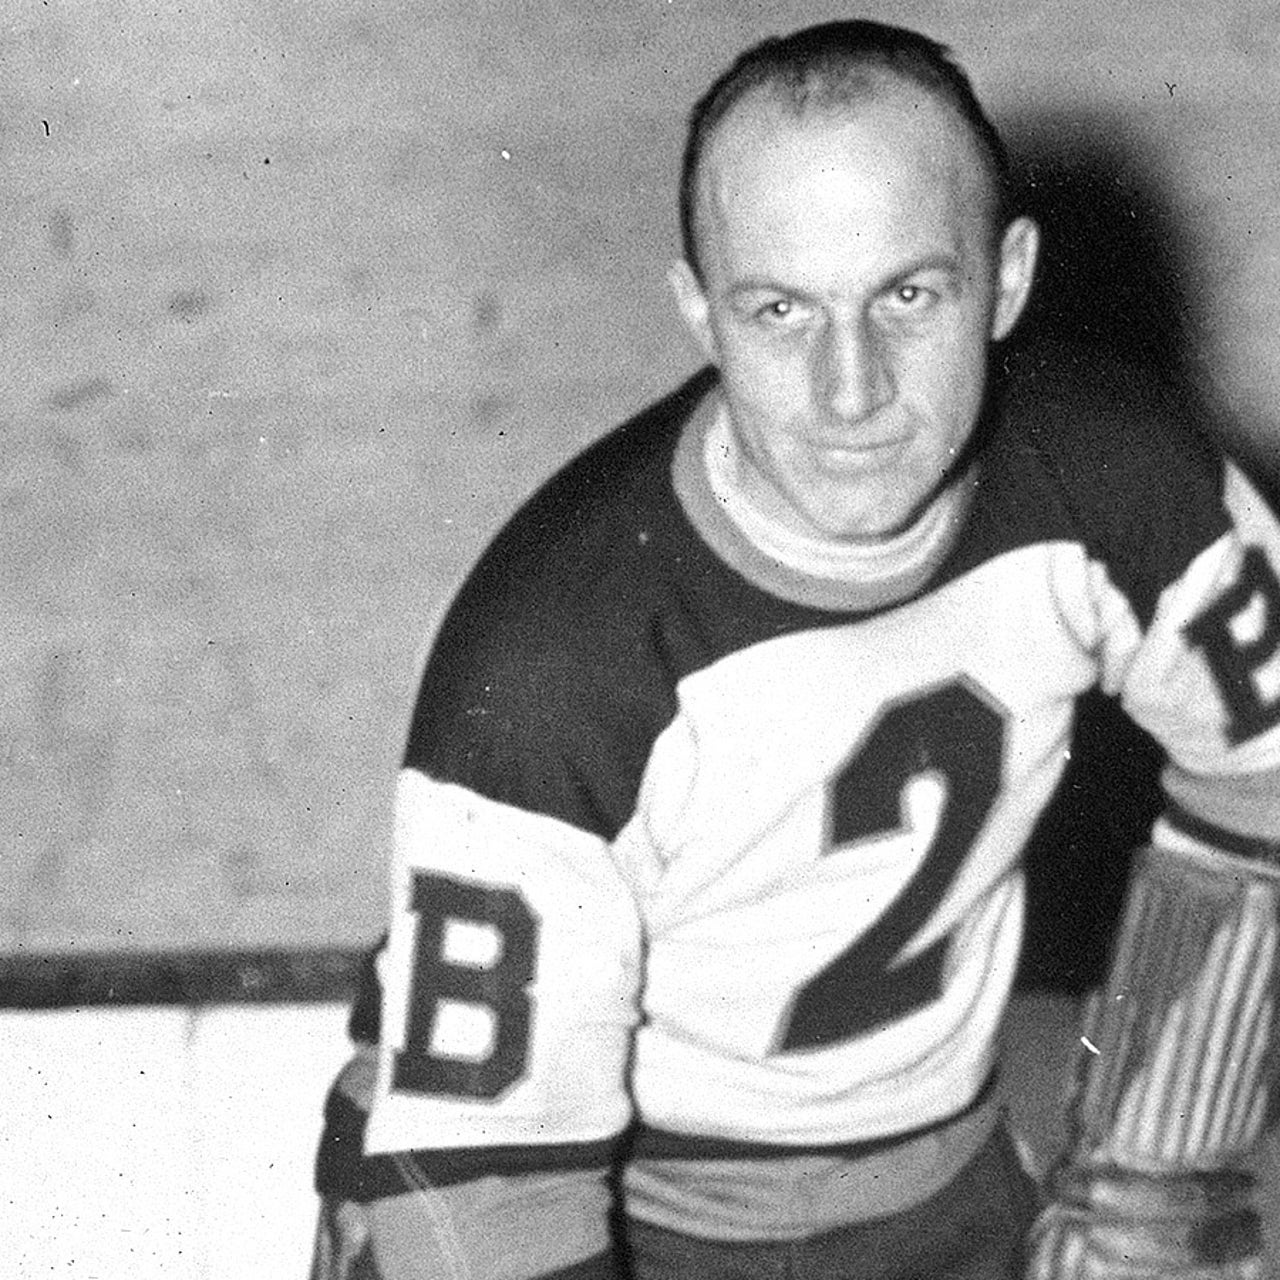 Jersey worn by old-time NHL great Eddie Shore goes up for auction